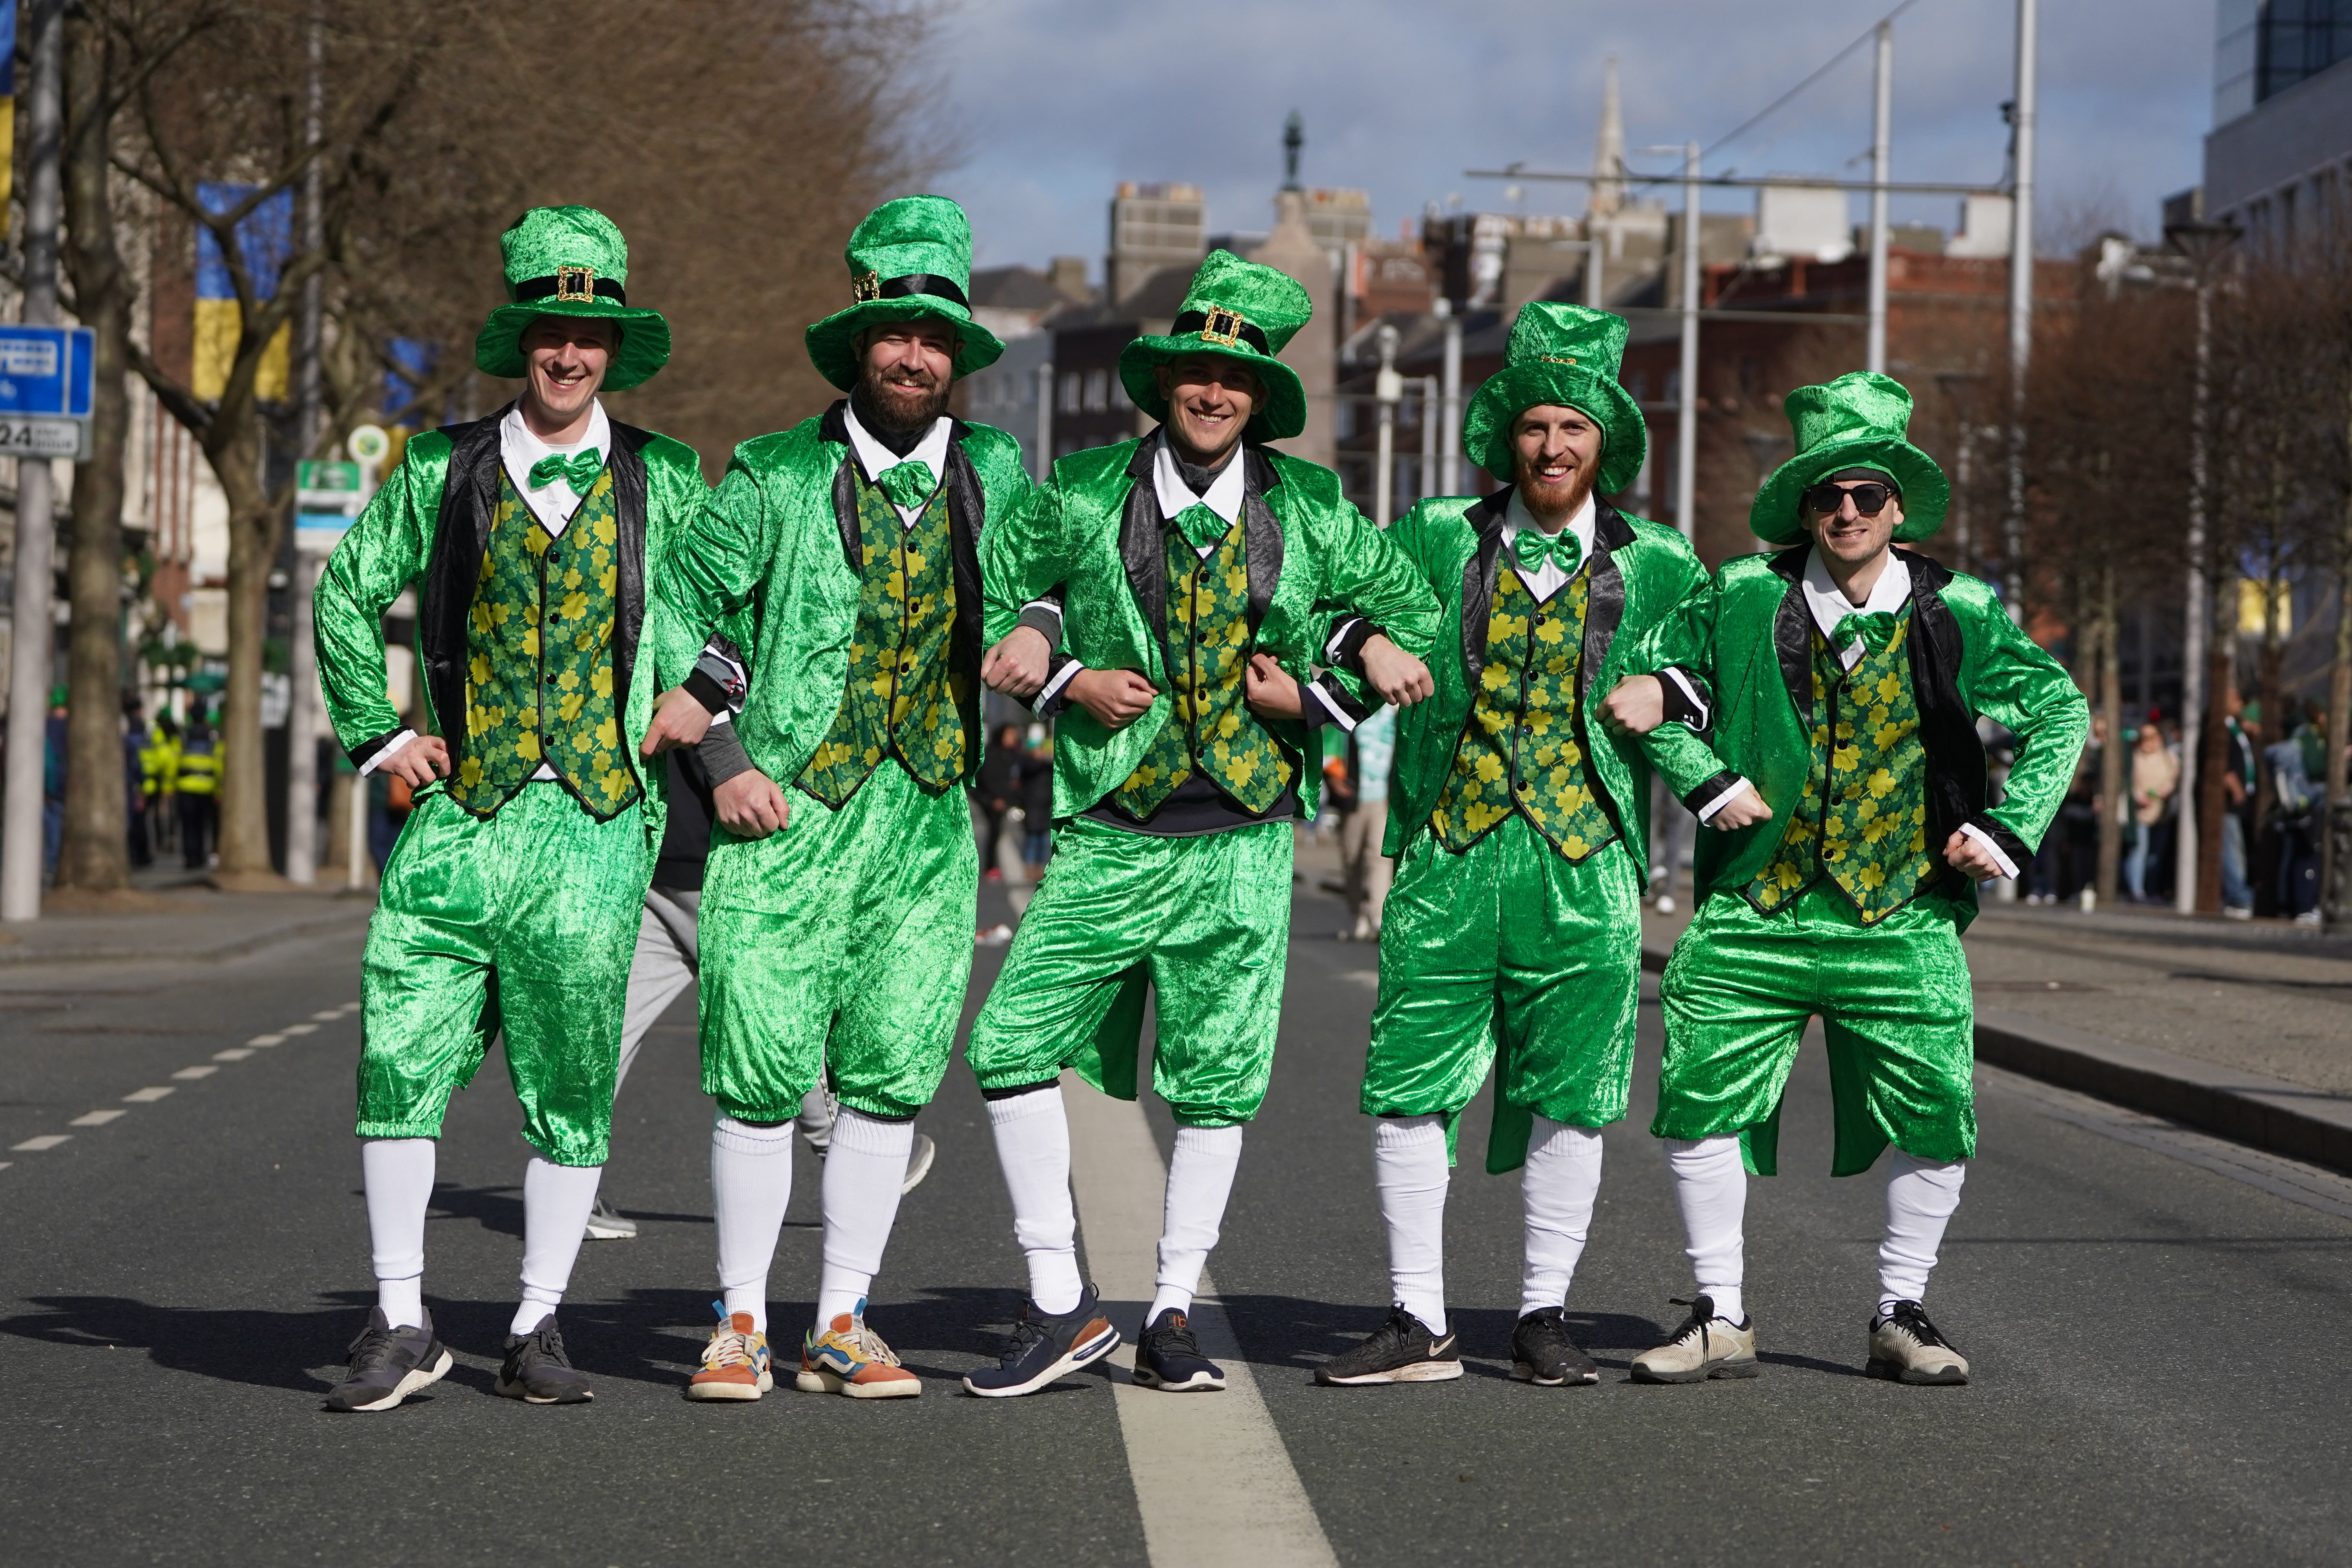 The St Patrick’s Day Parade in Dublin draws huge crowds (Brian Lawless/PA)